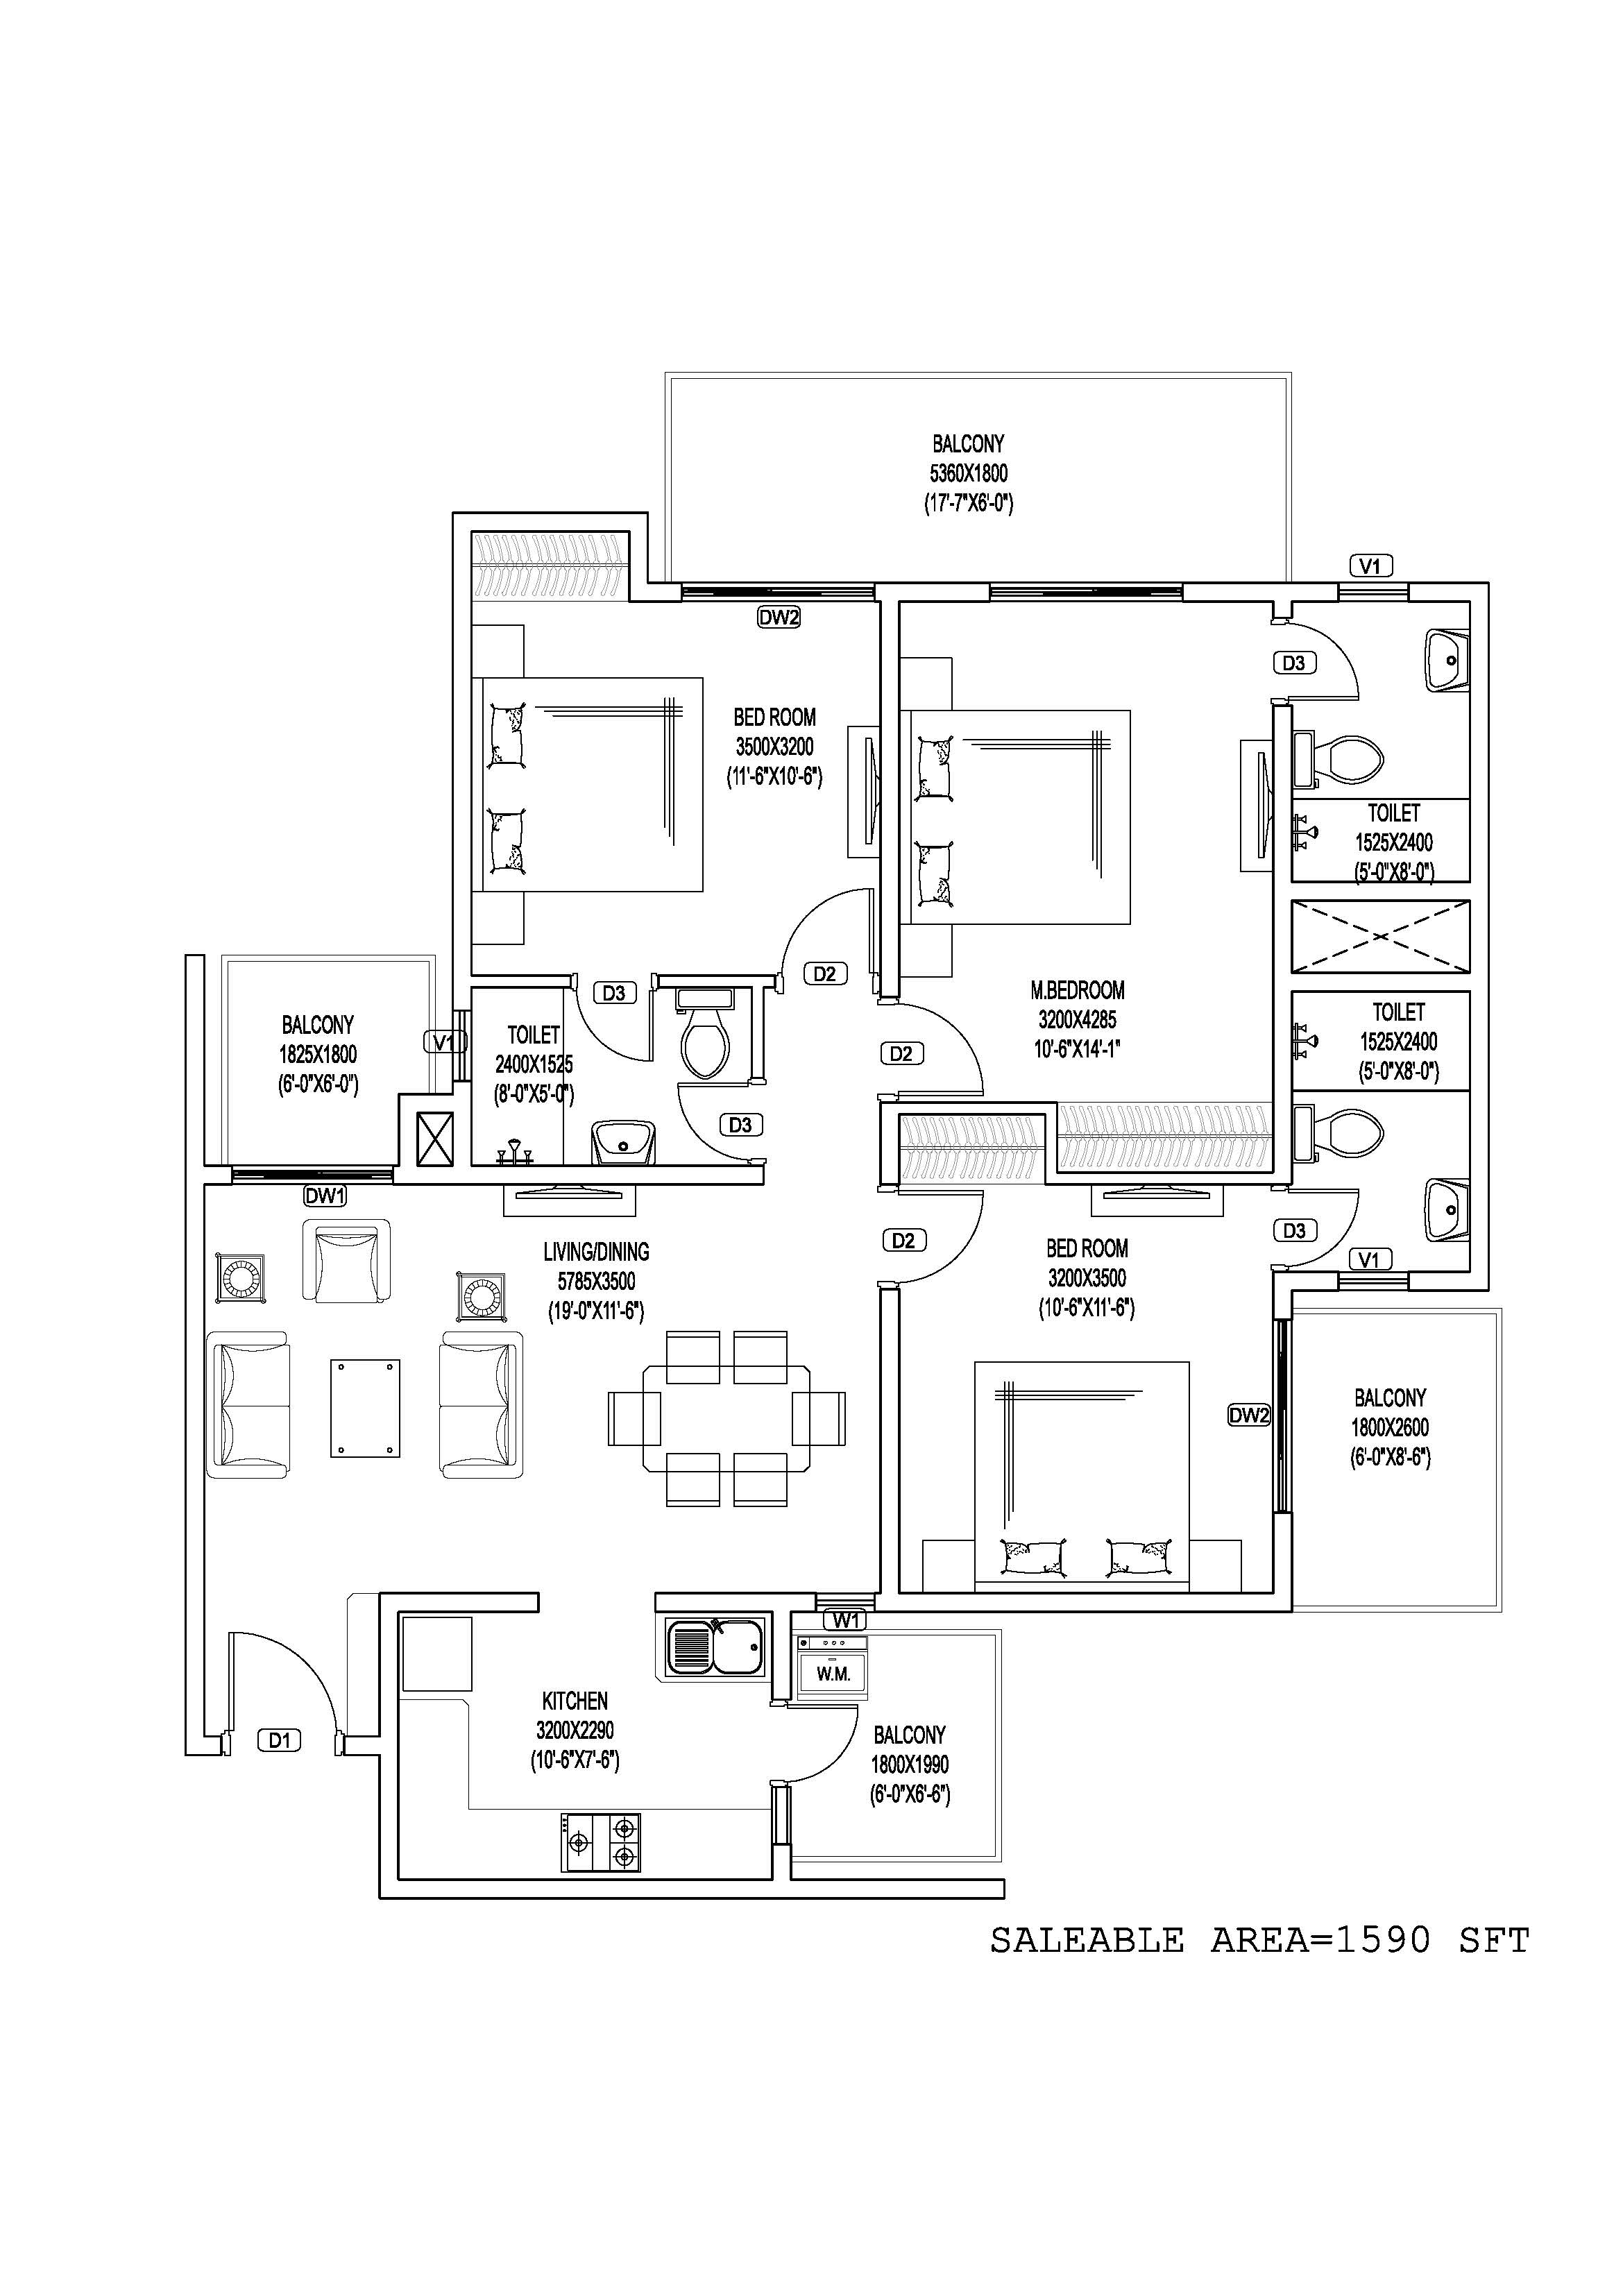 Central Park 3 Lake Front Towers Floor Plan